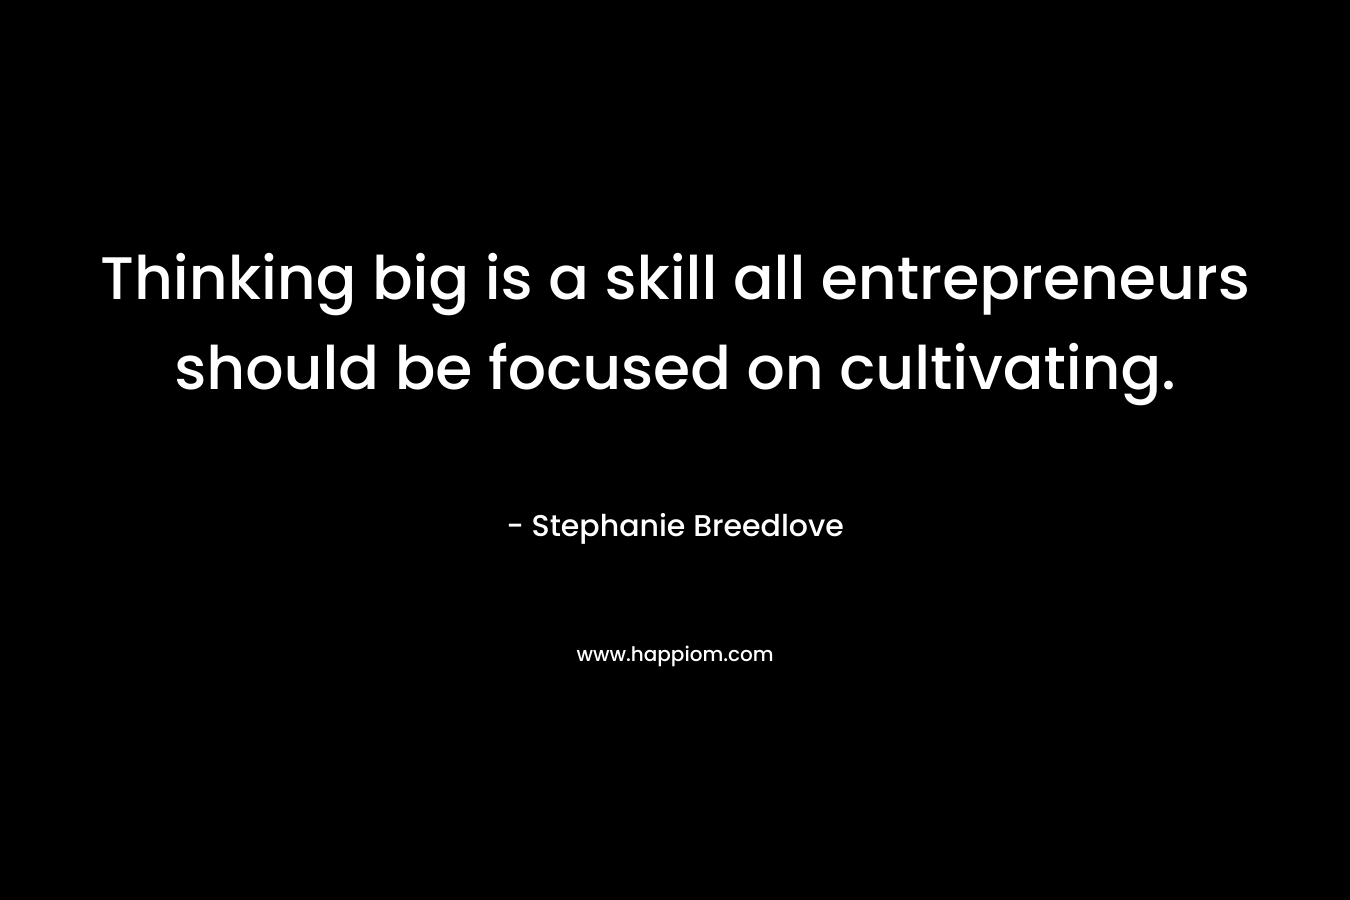 Thinking big is a skill all entrepreneurs should be focused on cultivating. – Stephanie Breedlove